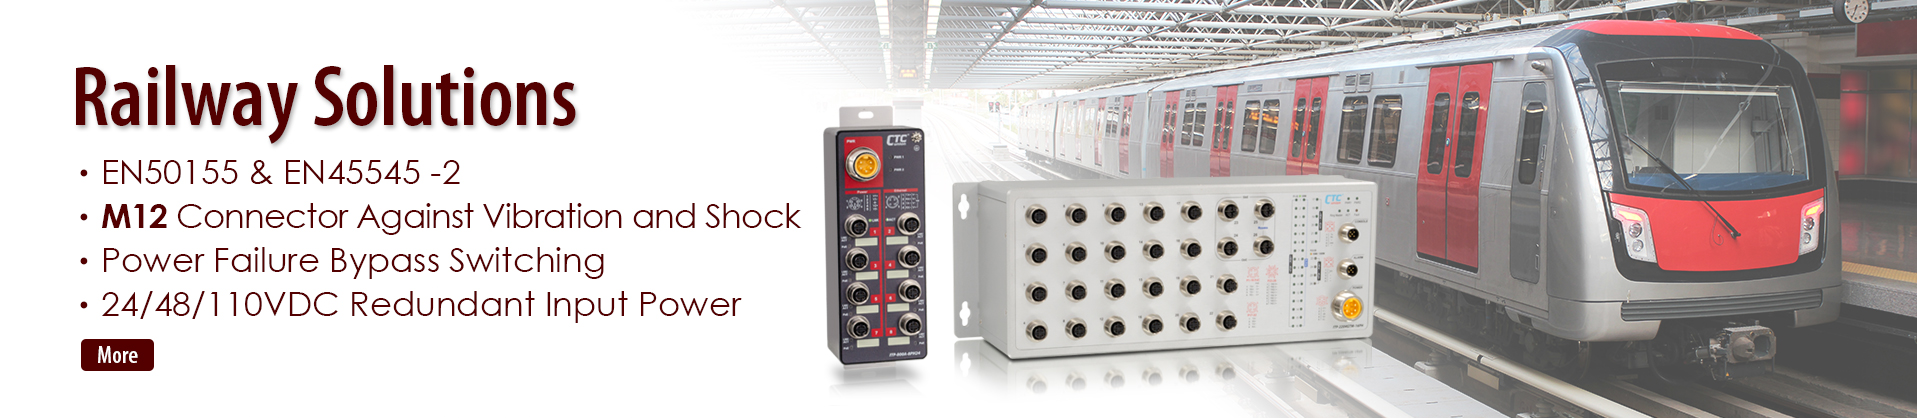 INDUSTRIAL CONNECTIVITY Rugged Railway Switch